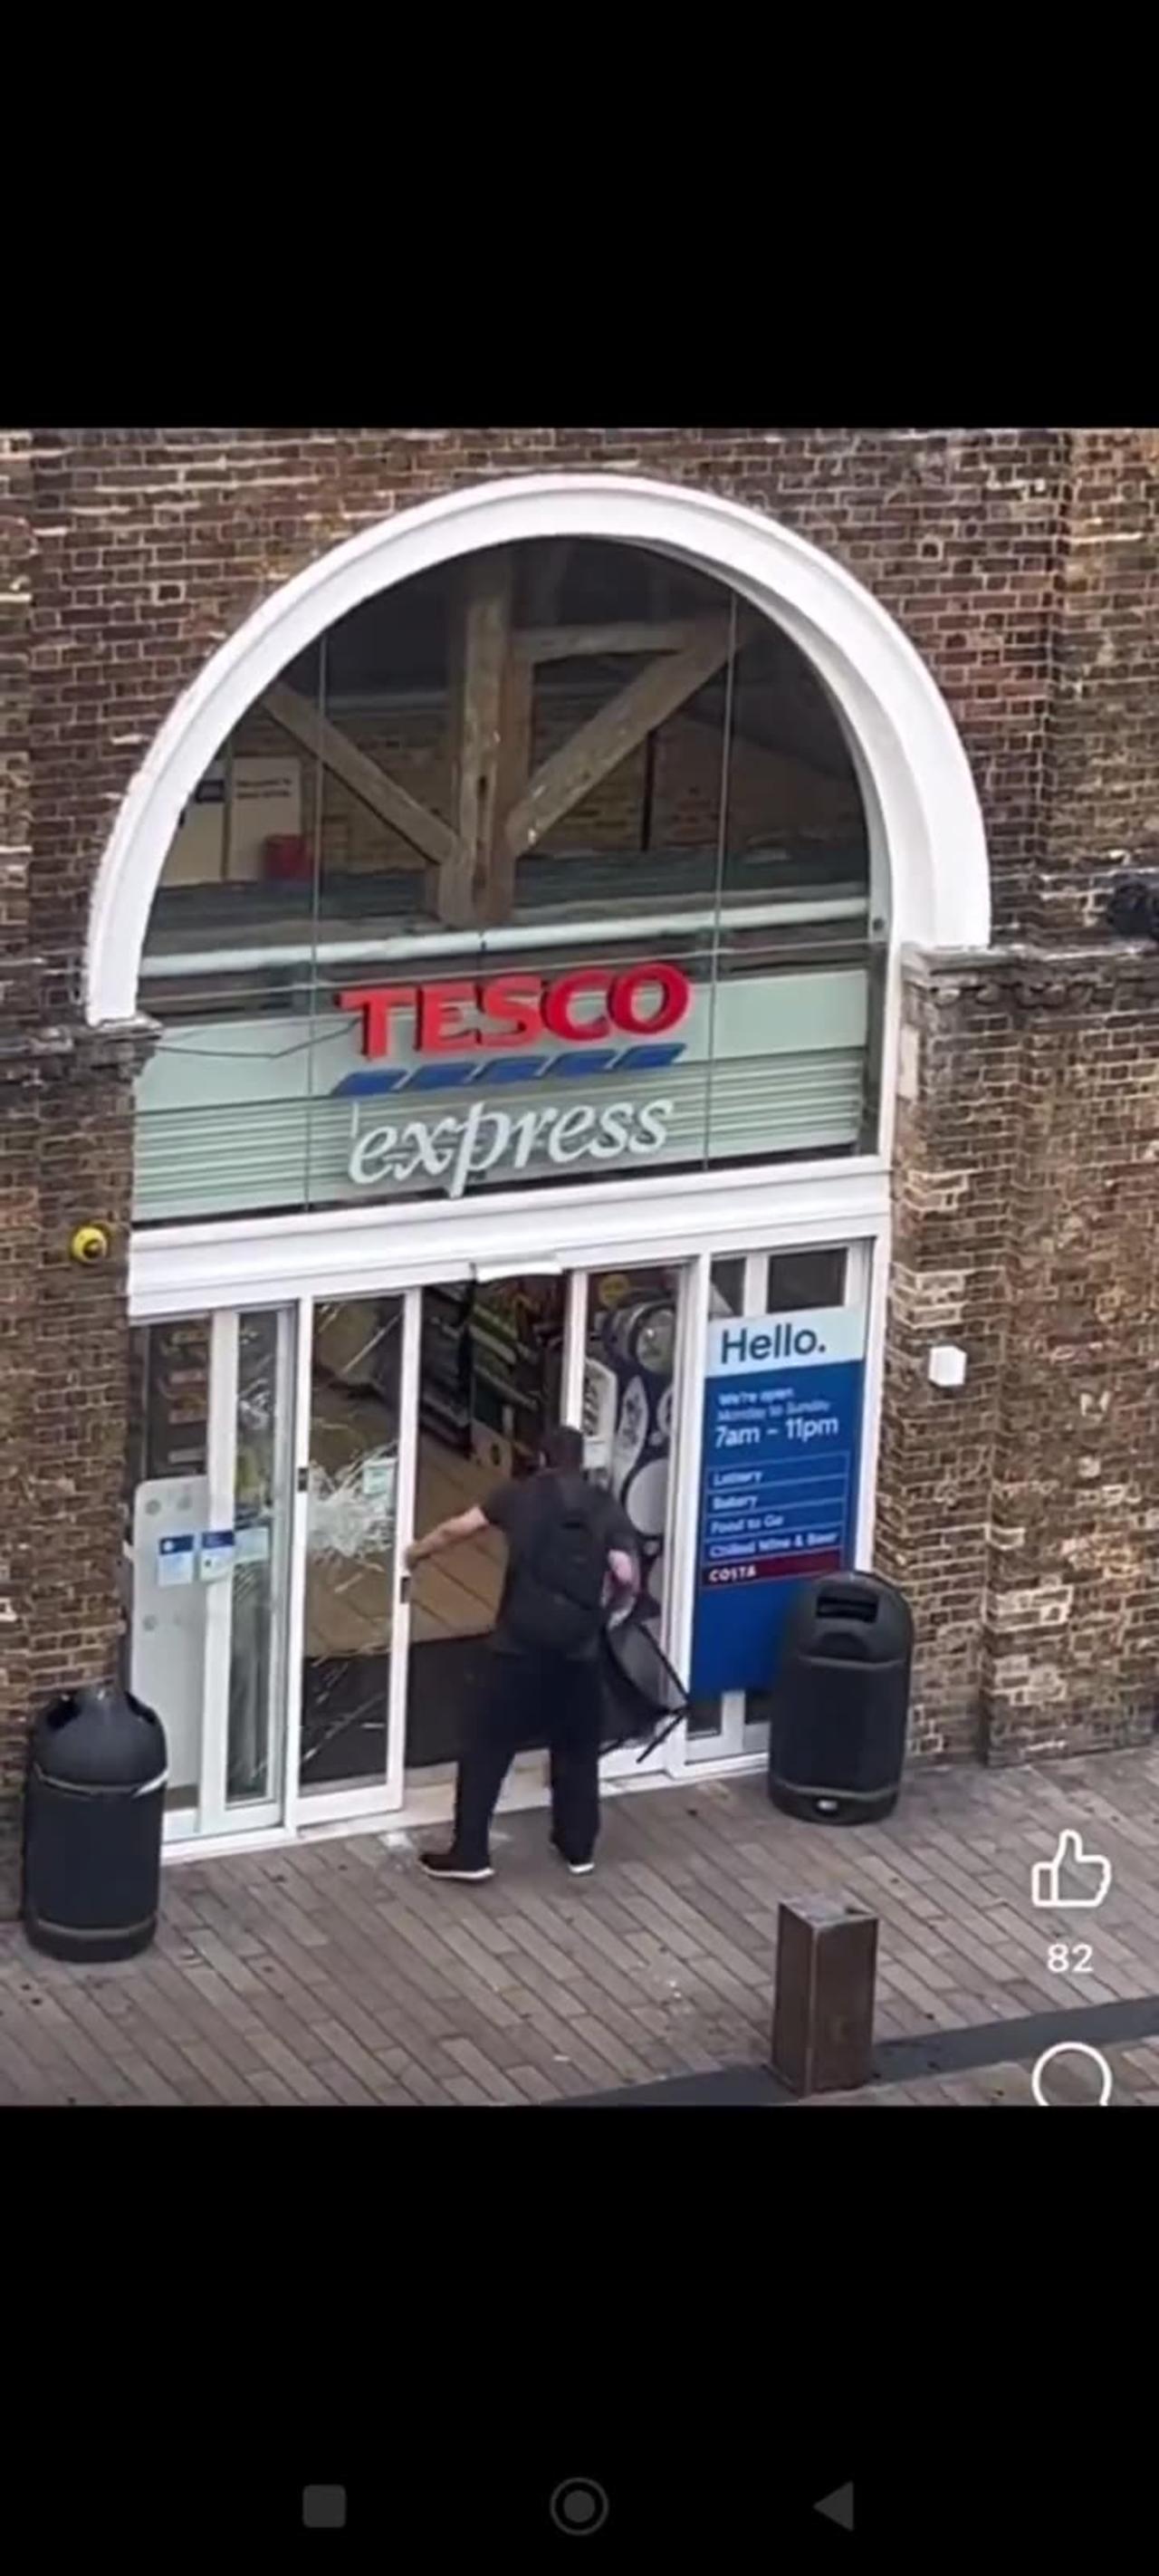 This was at Tesco Express in Woolwich earlier this week